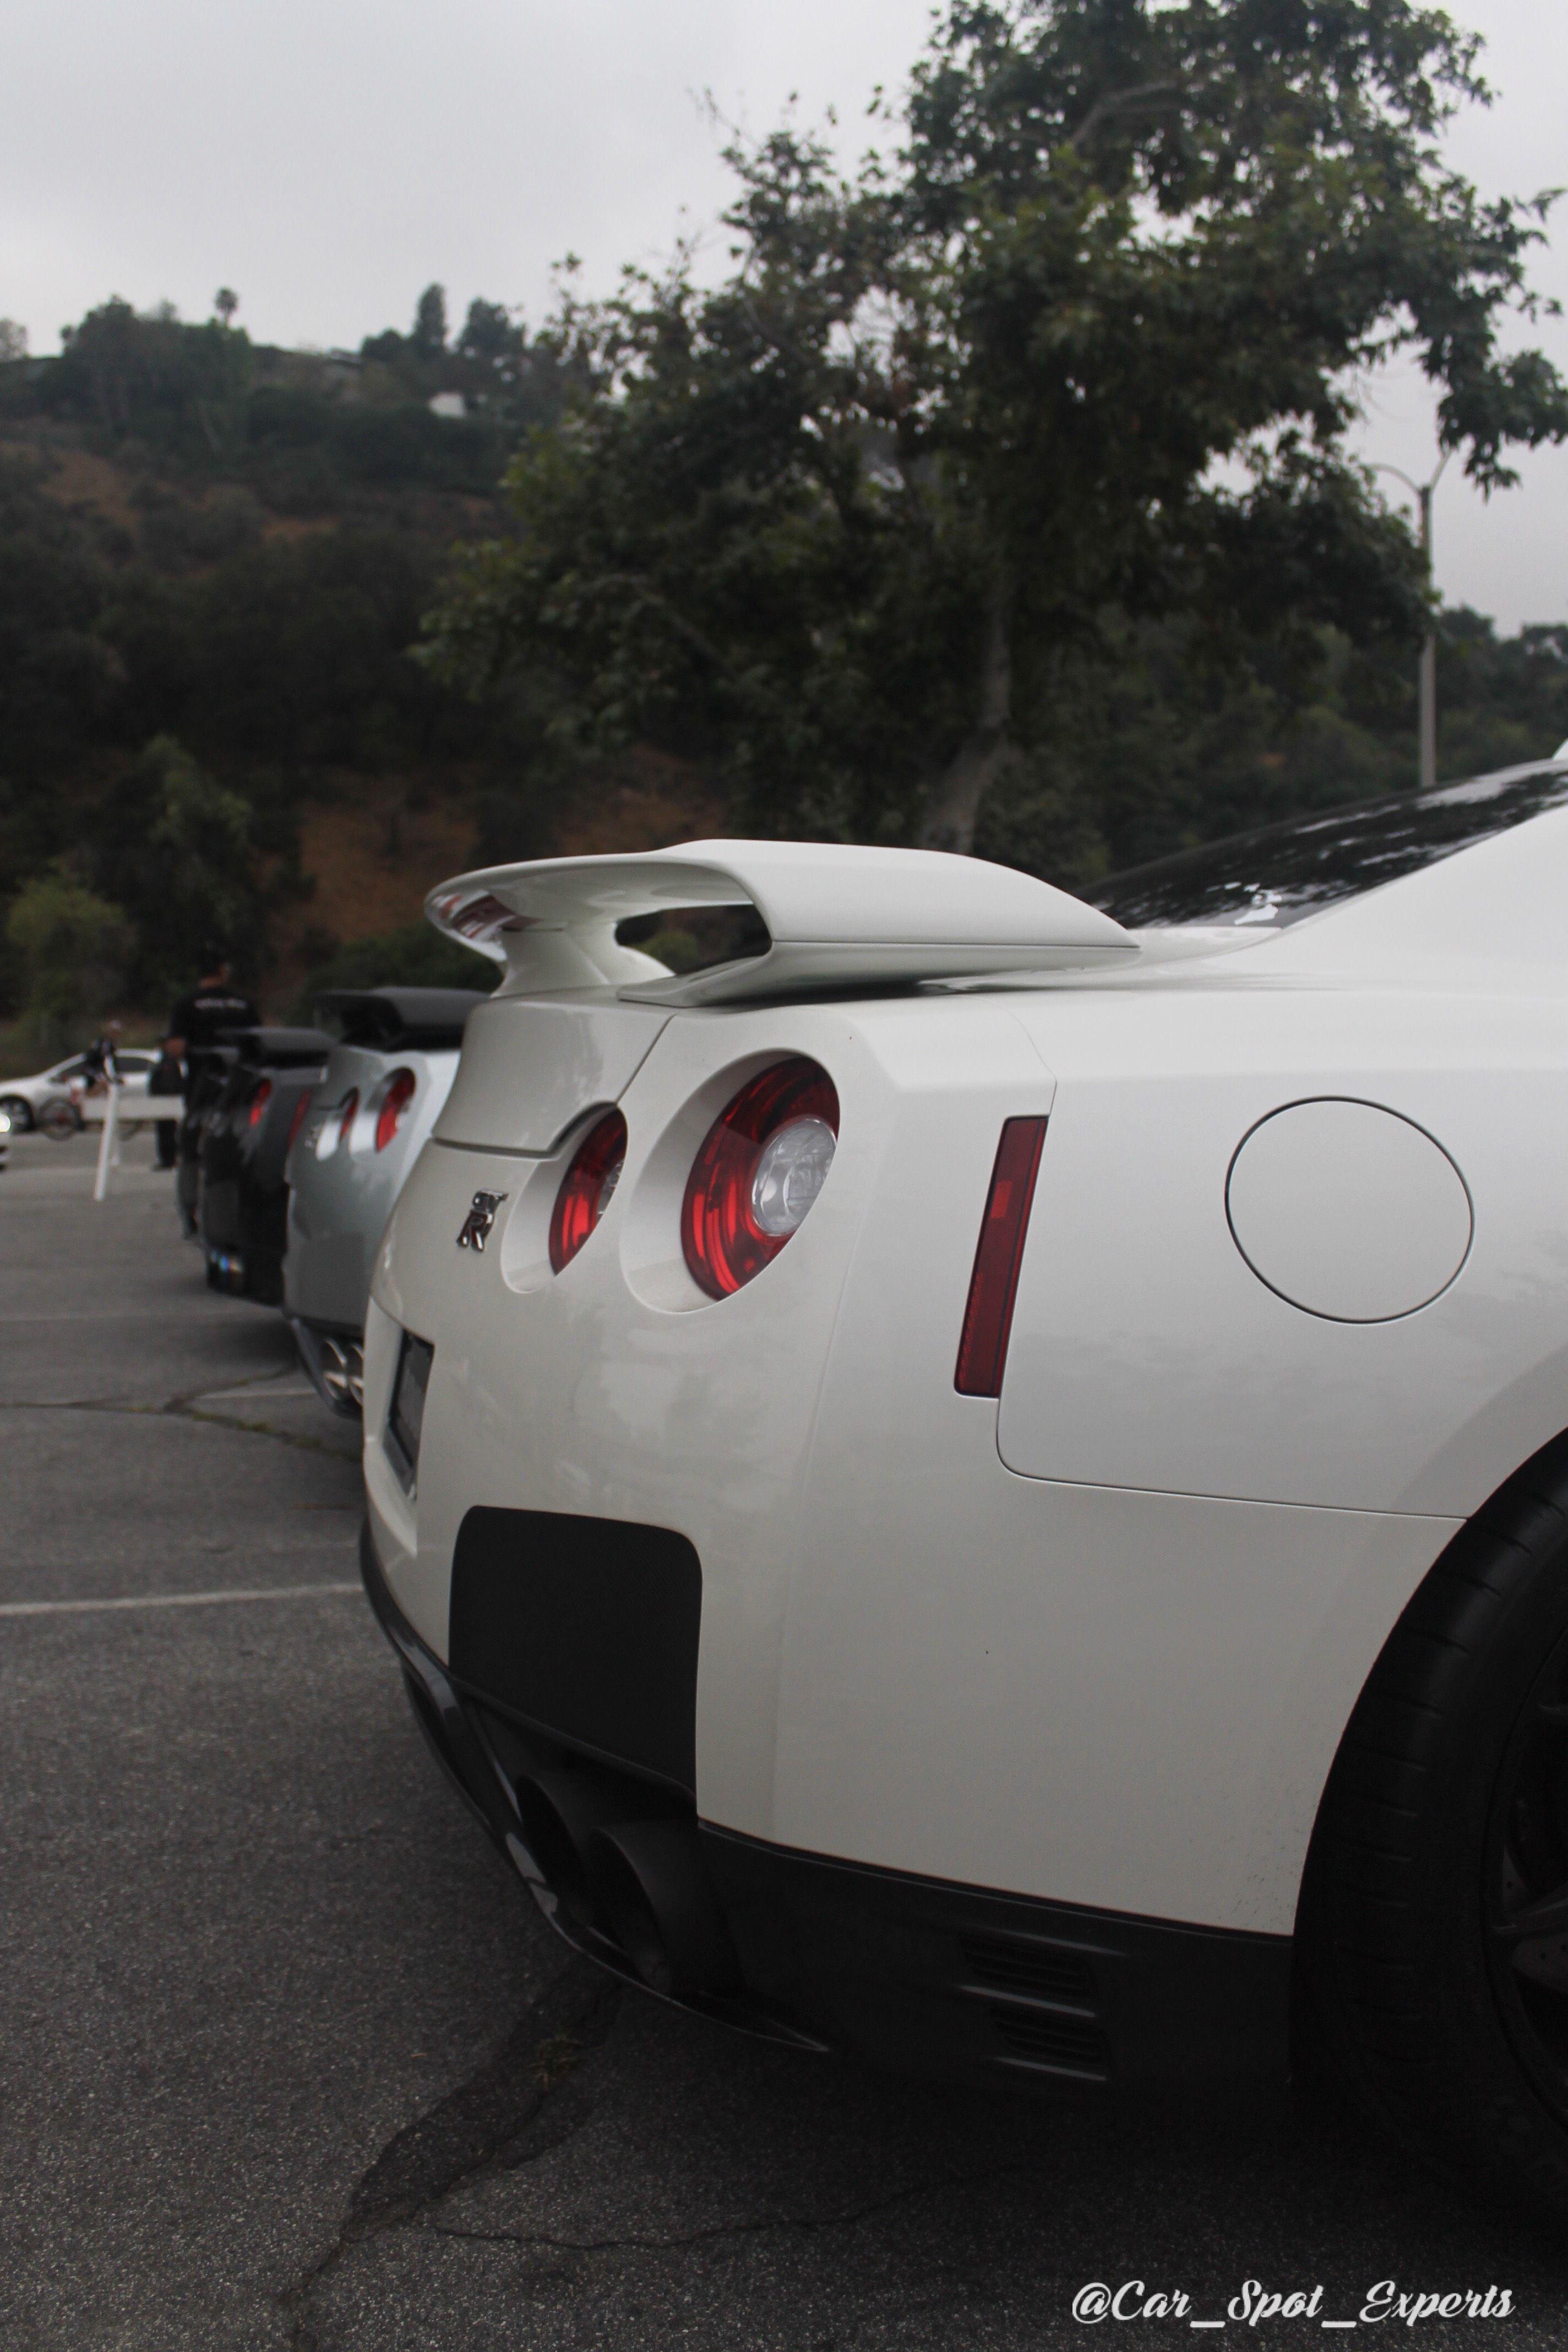 Gtr Iphone Wallpapers Top Free Gtr Iphone Backgrounds Wallpaperaccess